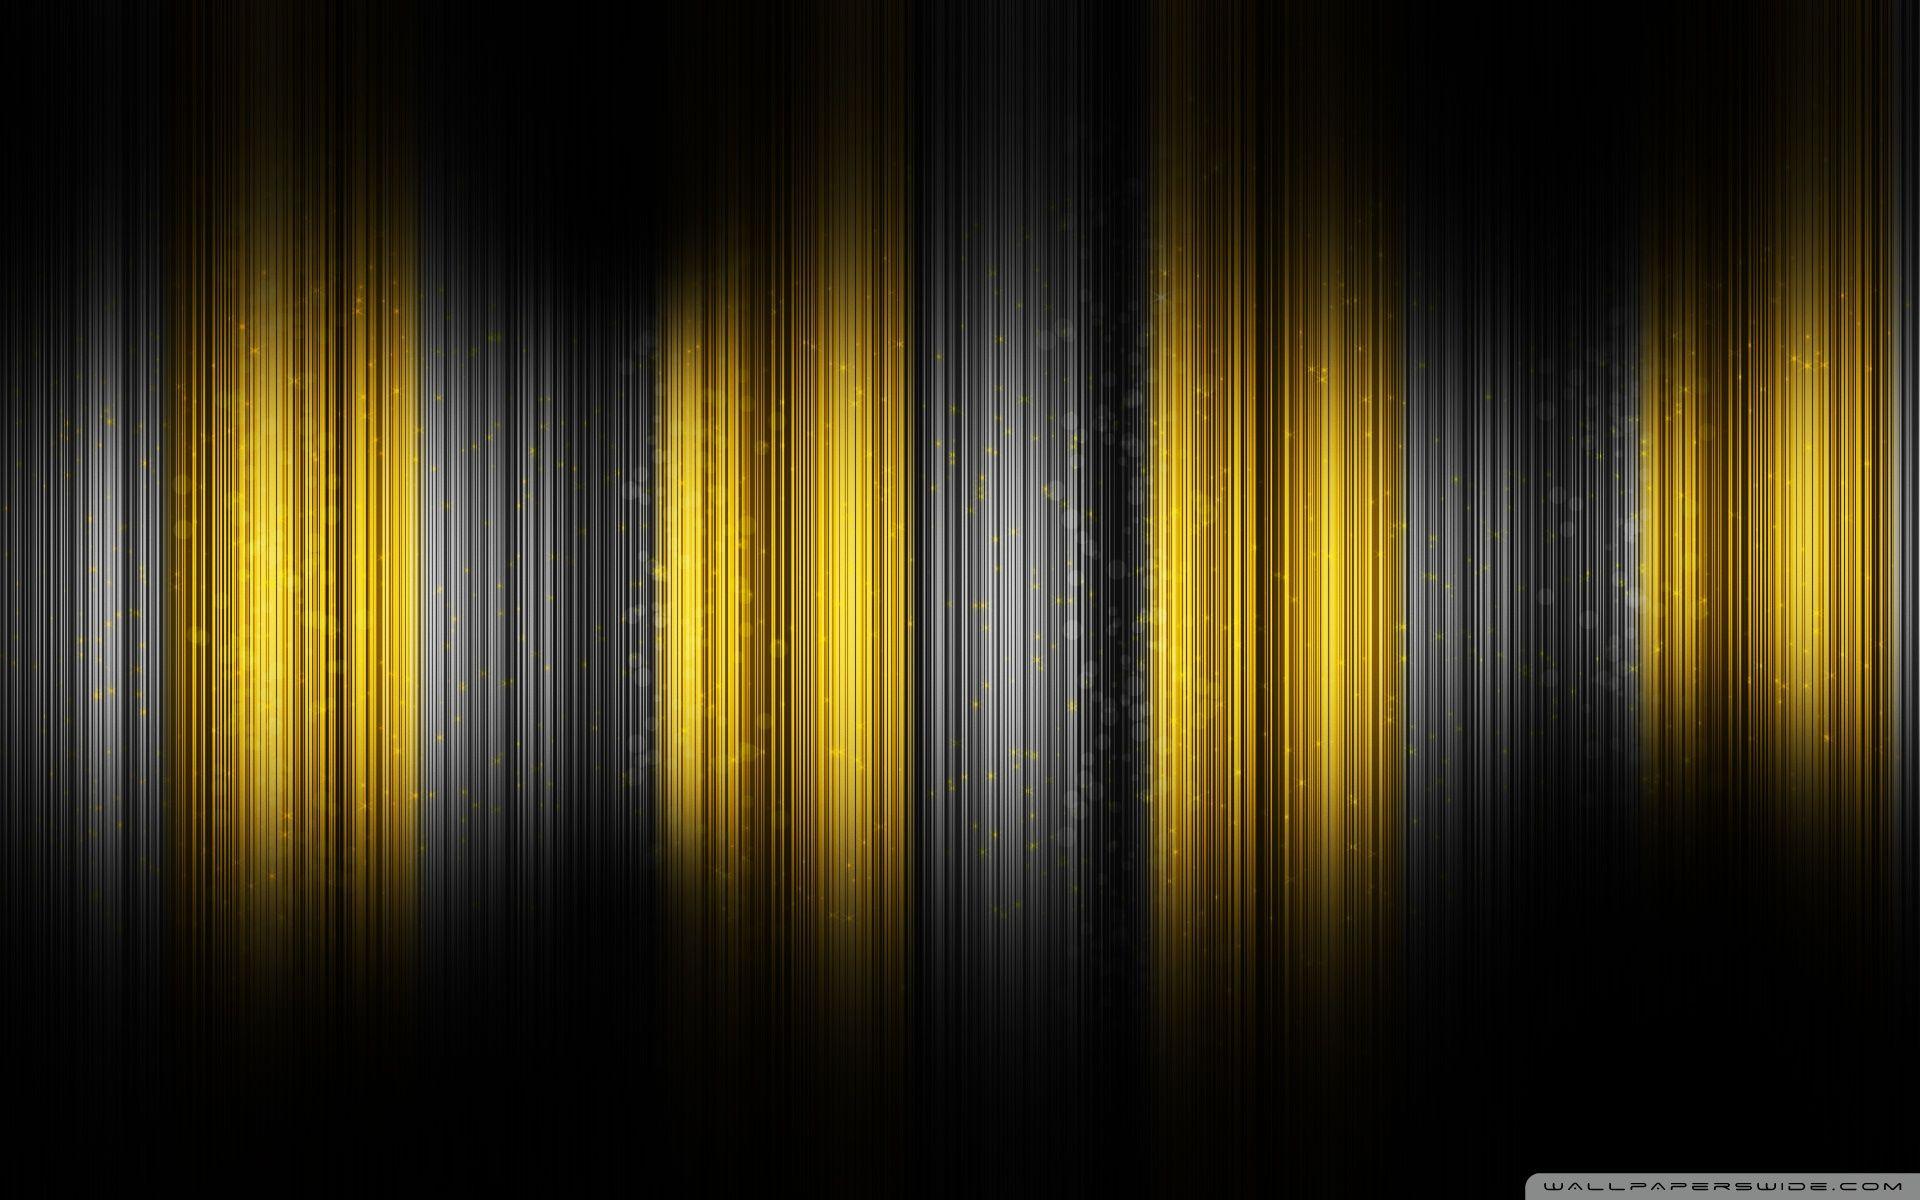 Download Free 100 + black and yellow Wallpapers